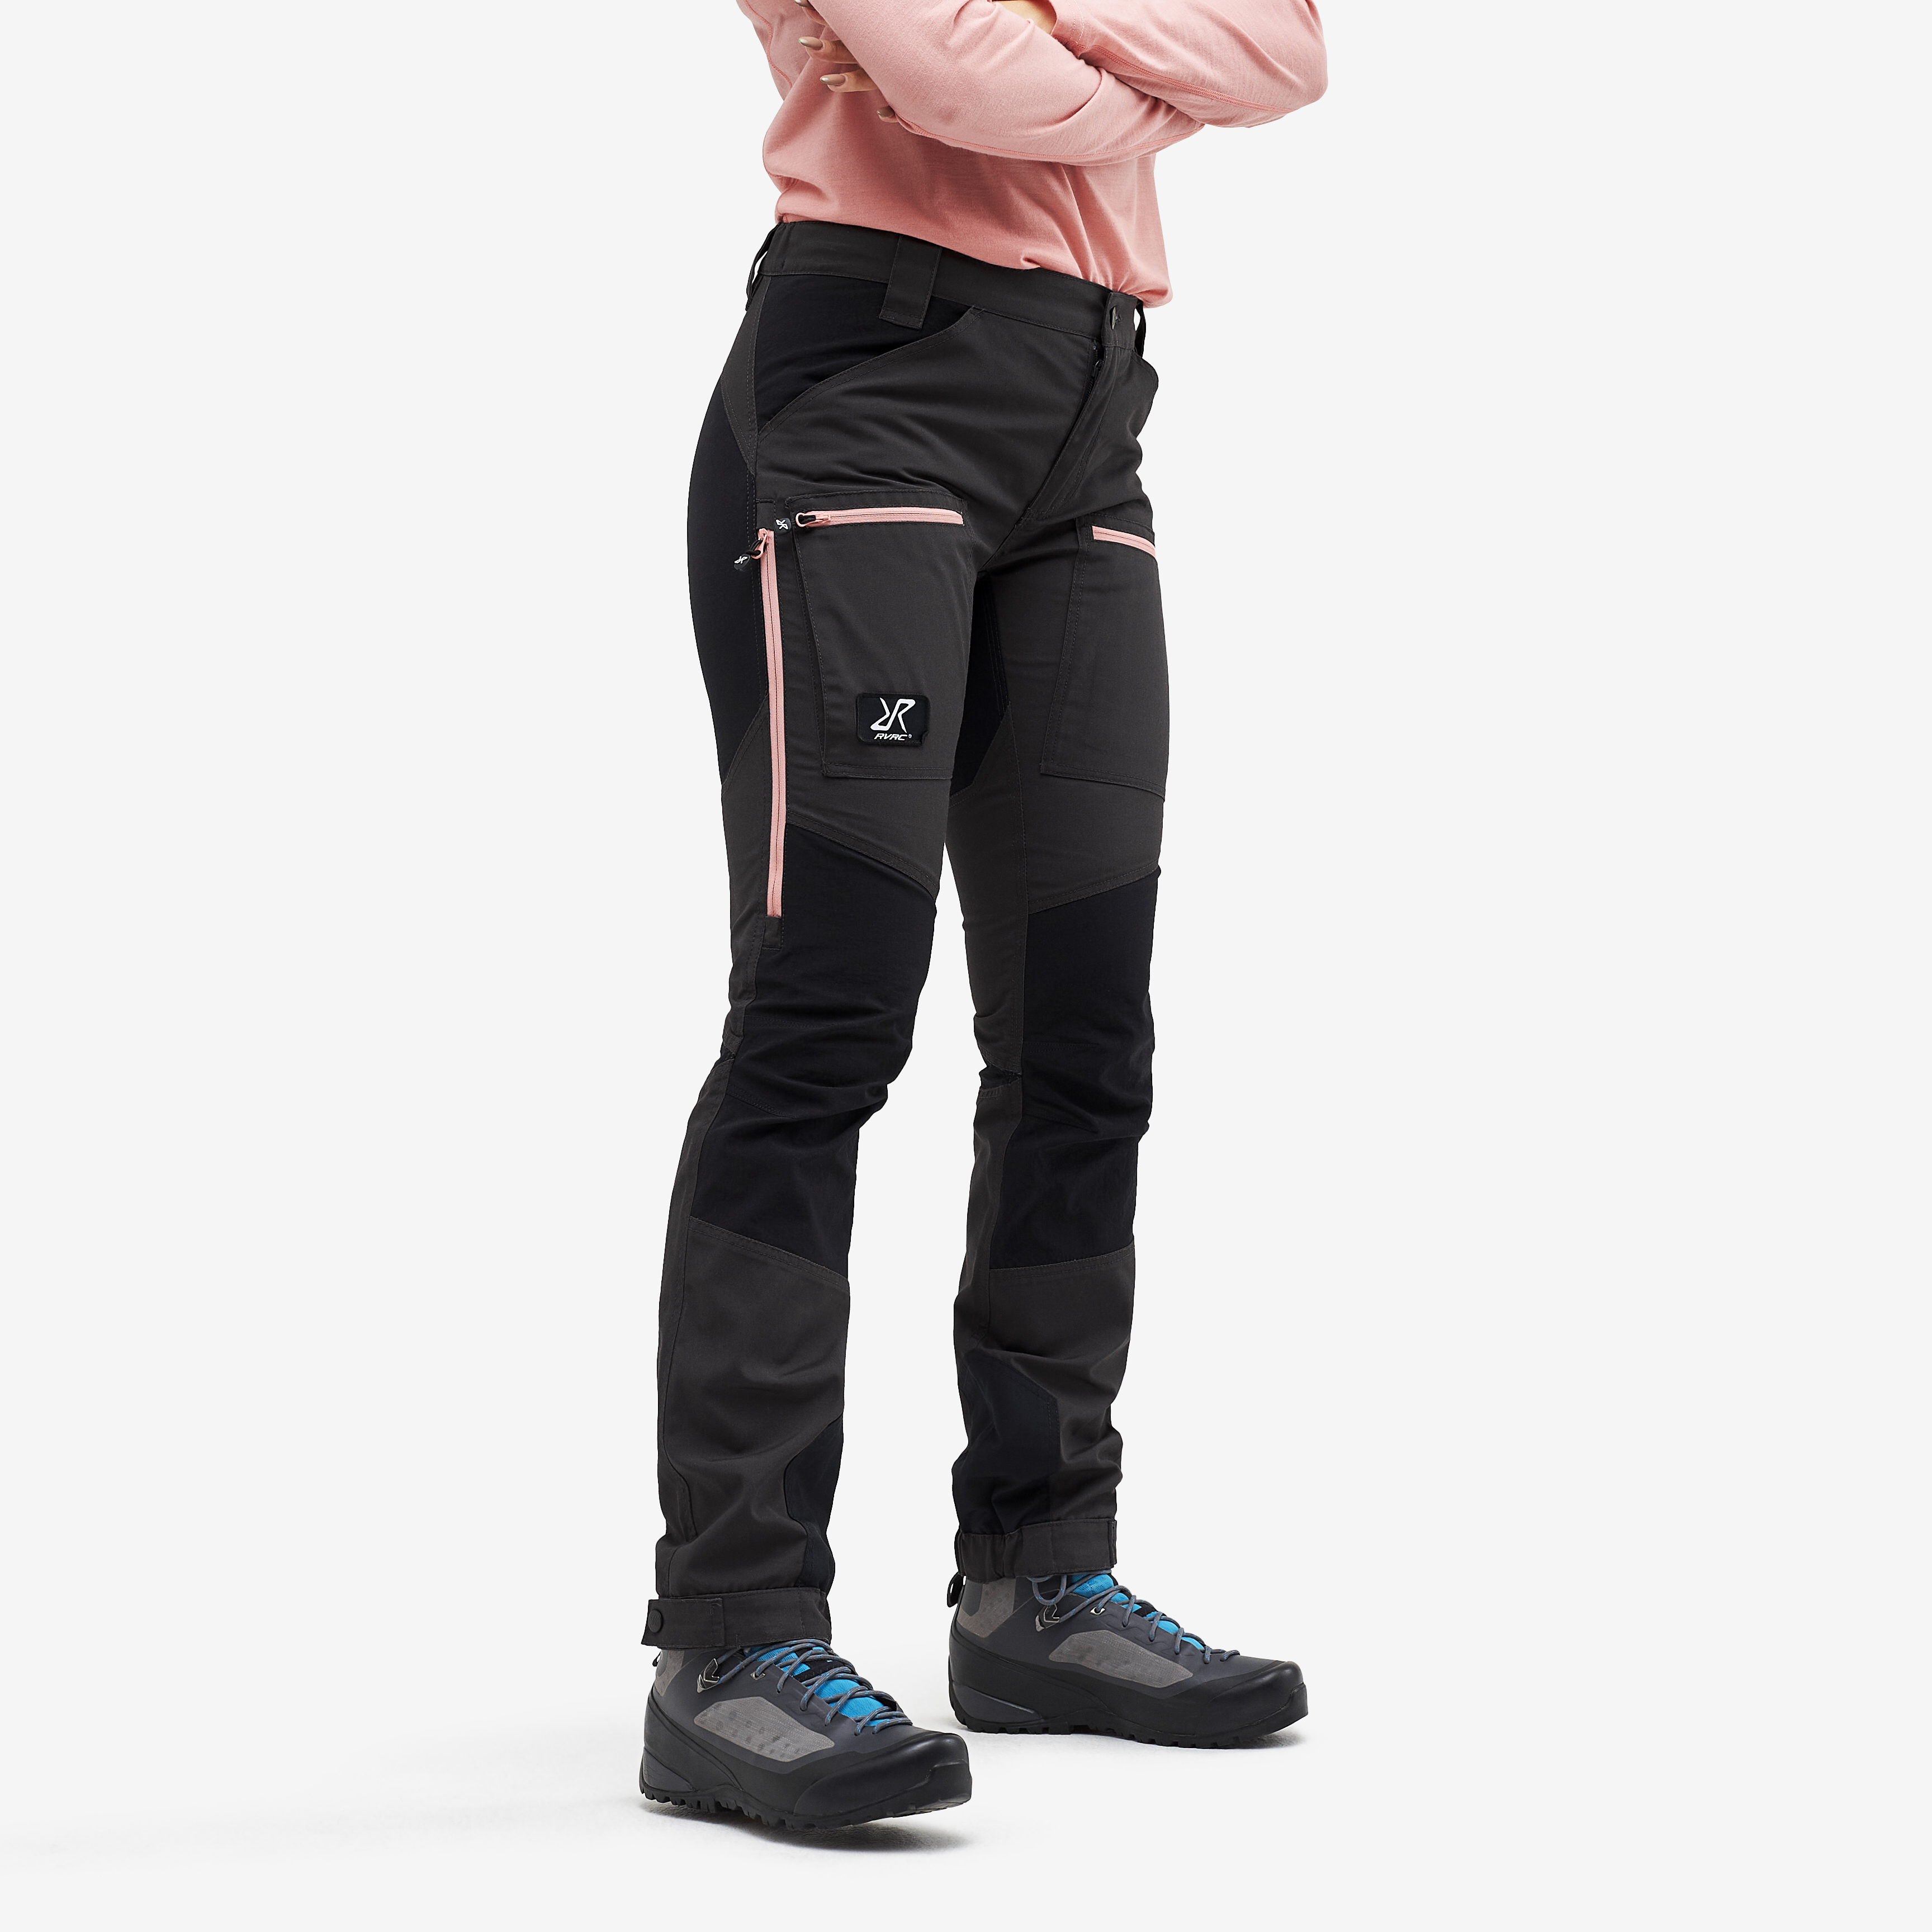 Nordwand Pro Pants Anthracite/Dusty pink Dam